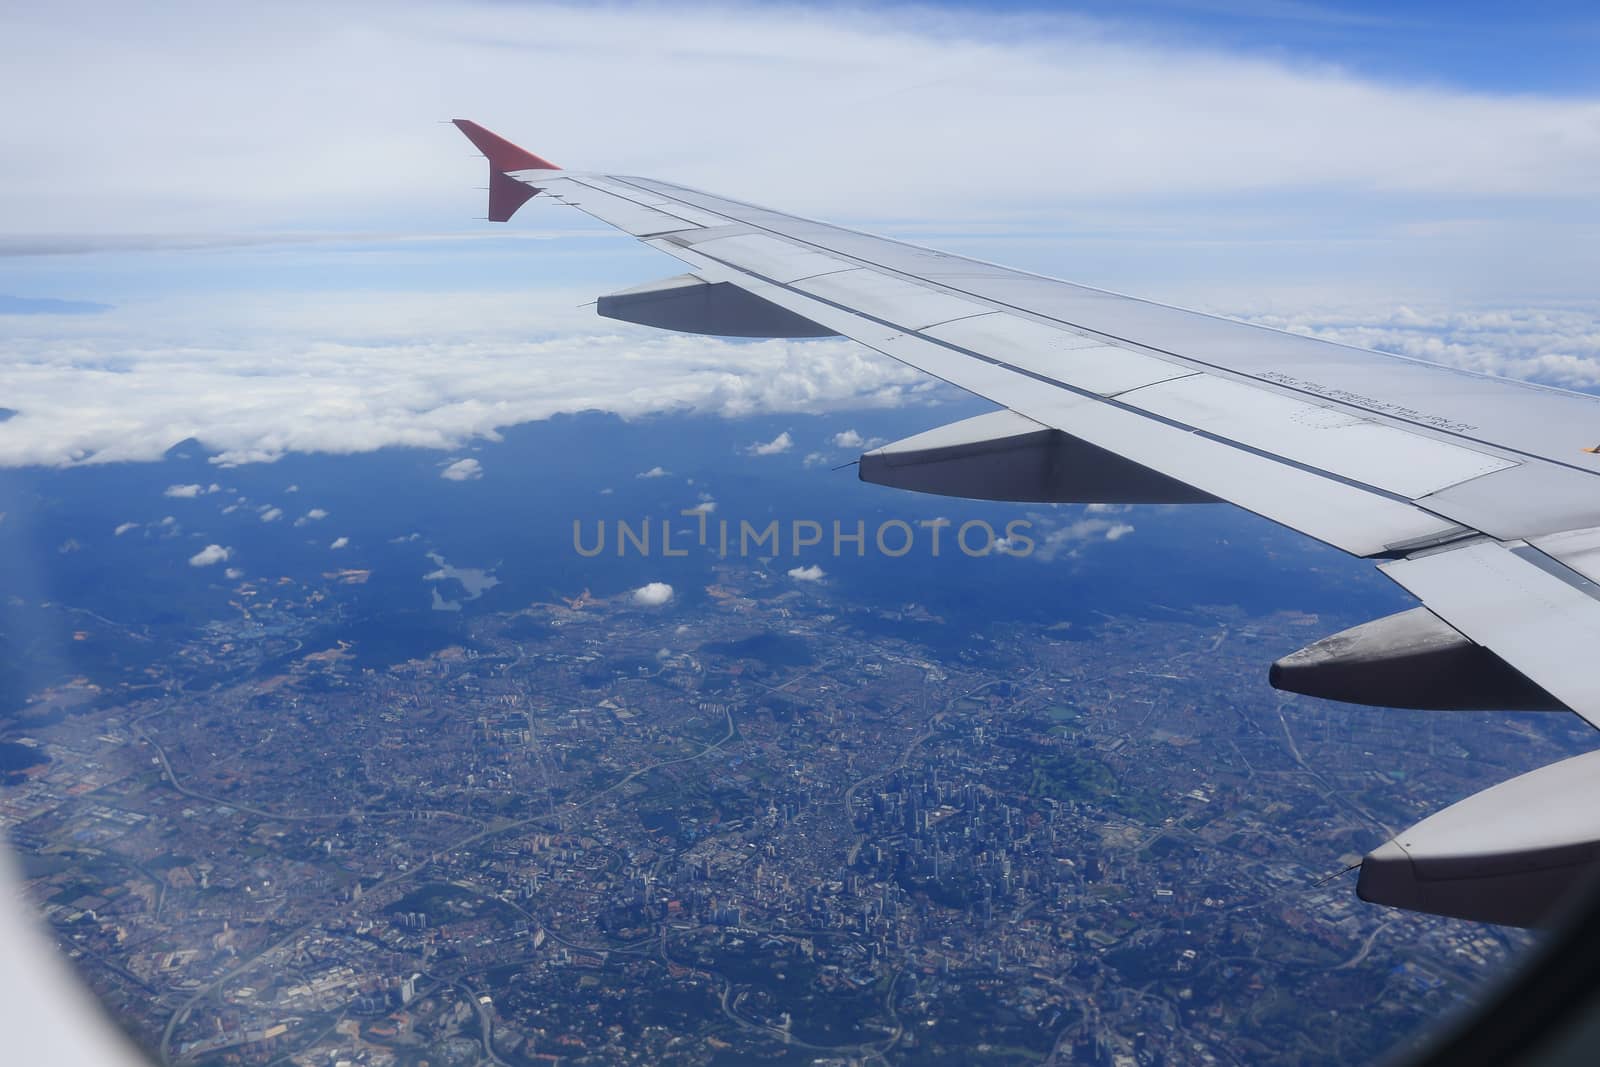 view from the airplane window, cloudy day by rufous